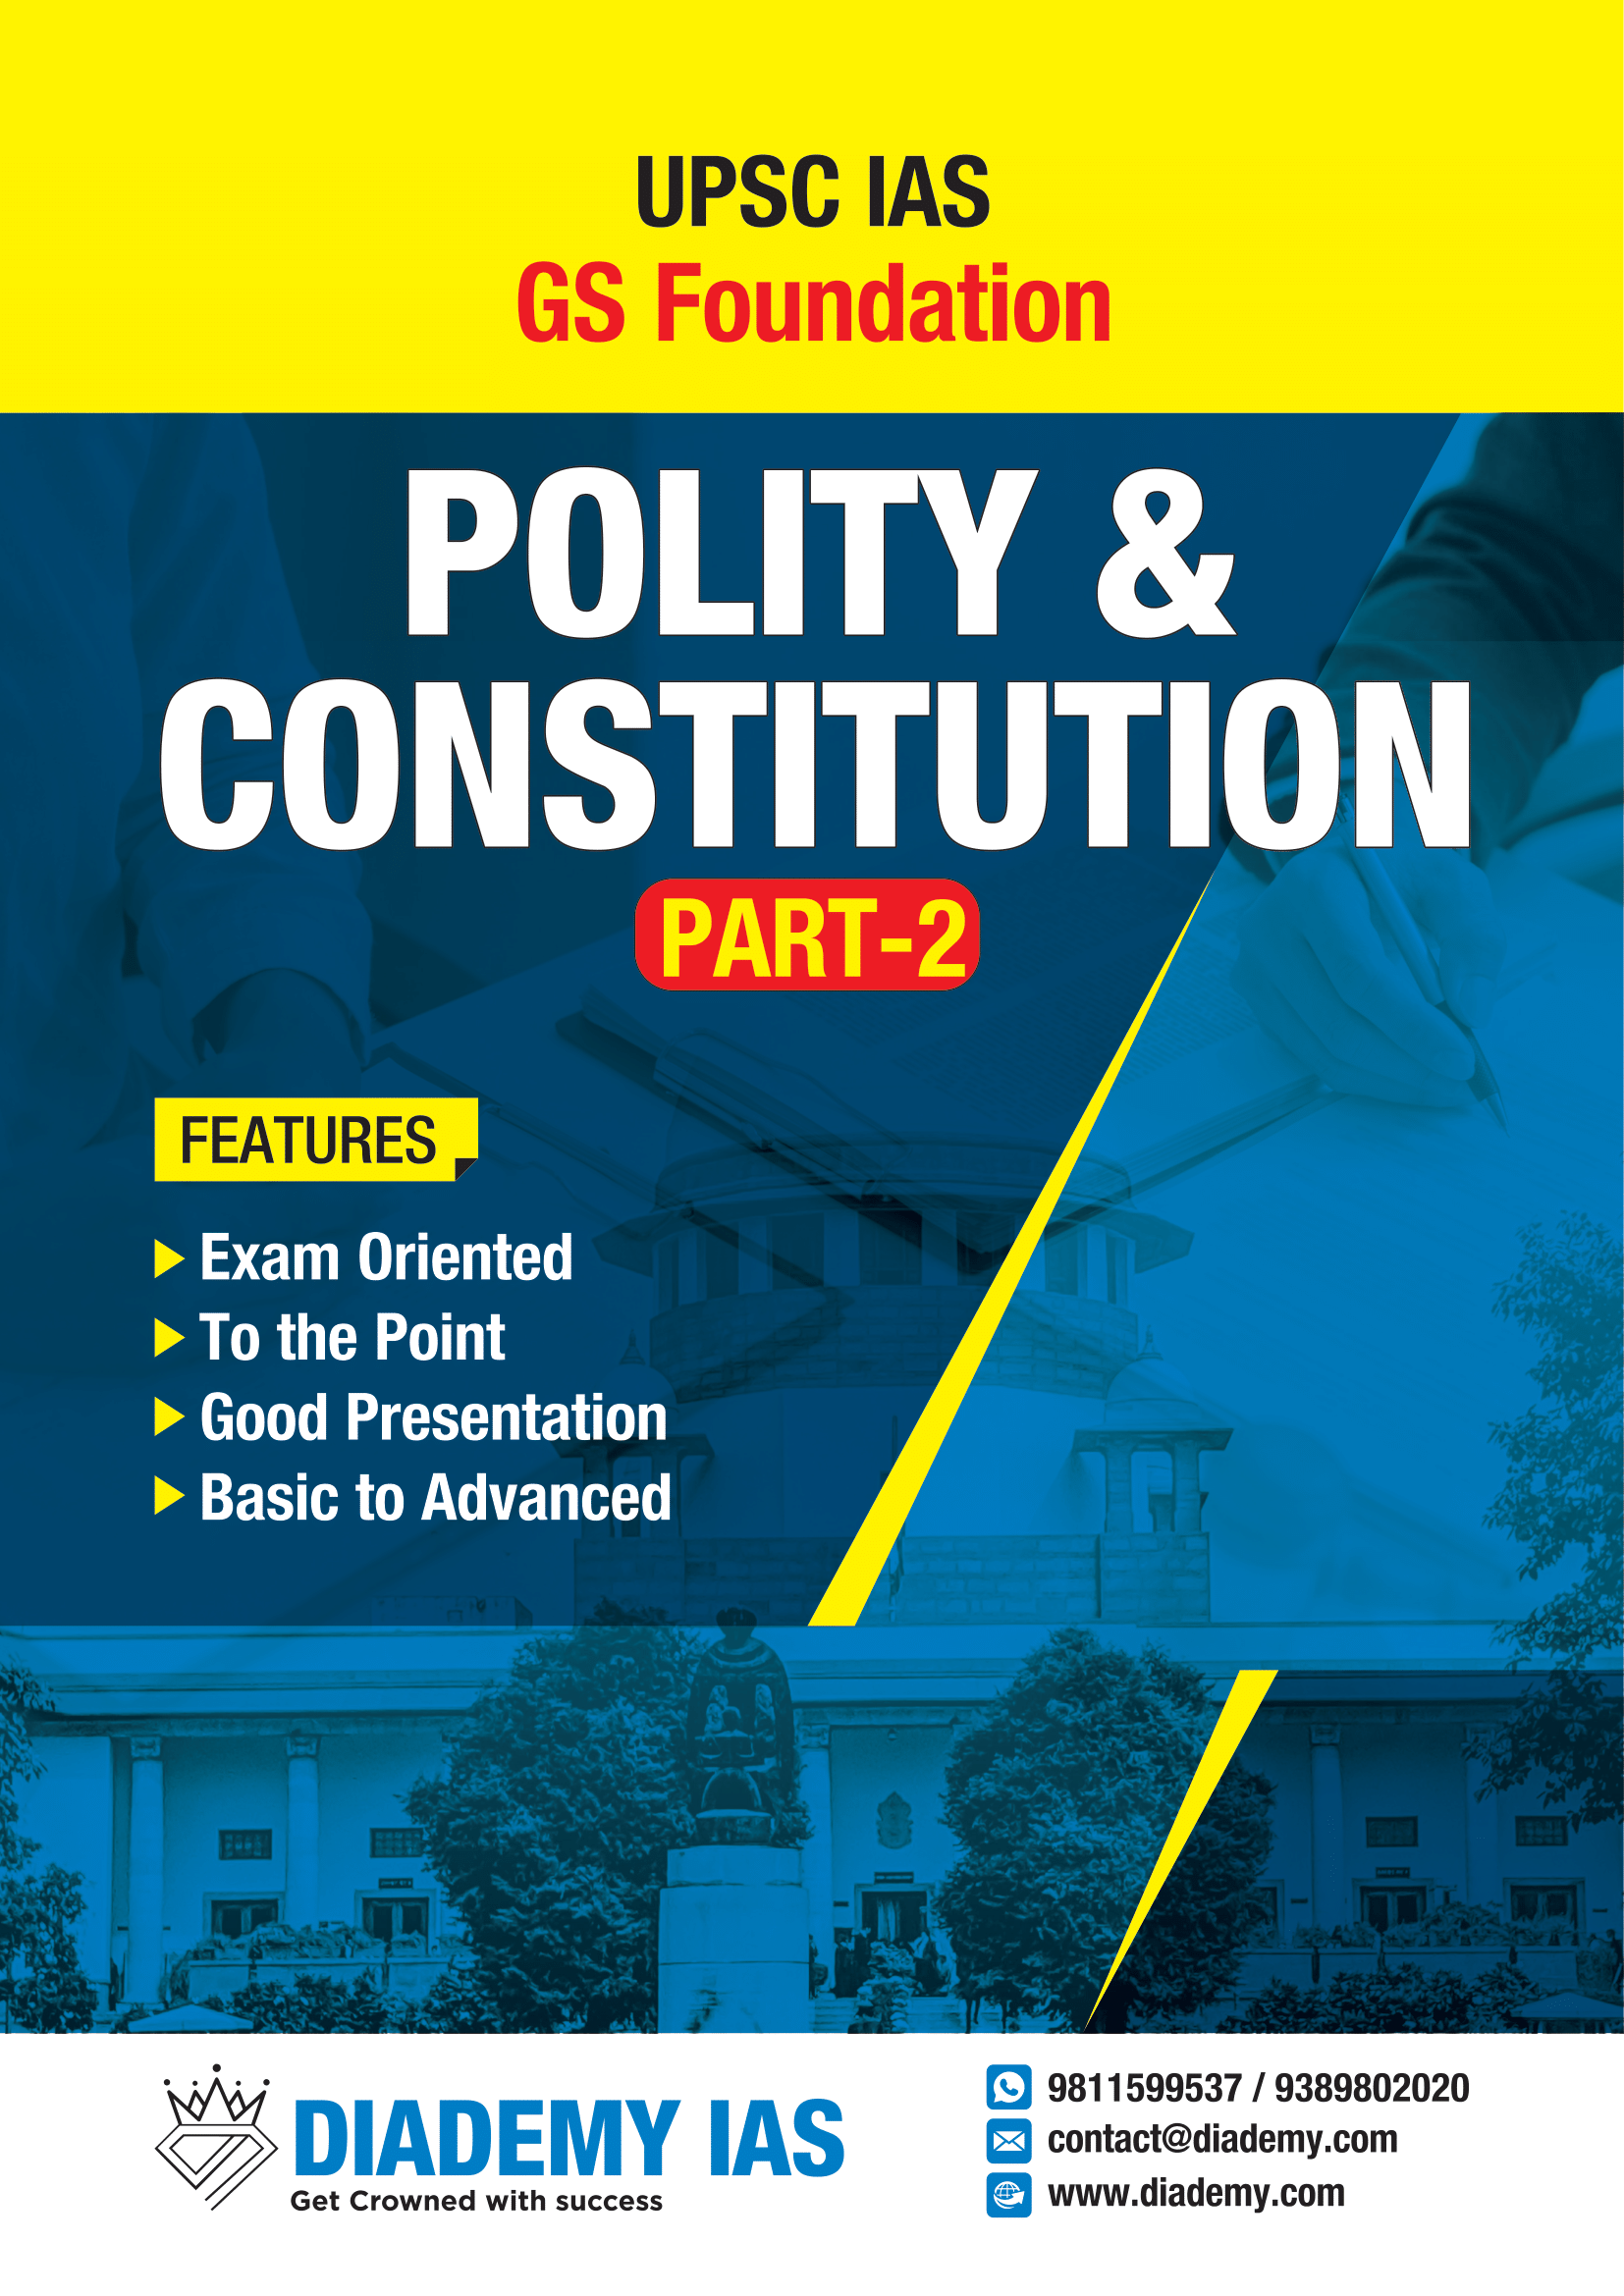 Polity-Contitution-Part-1-2-2.png